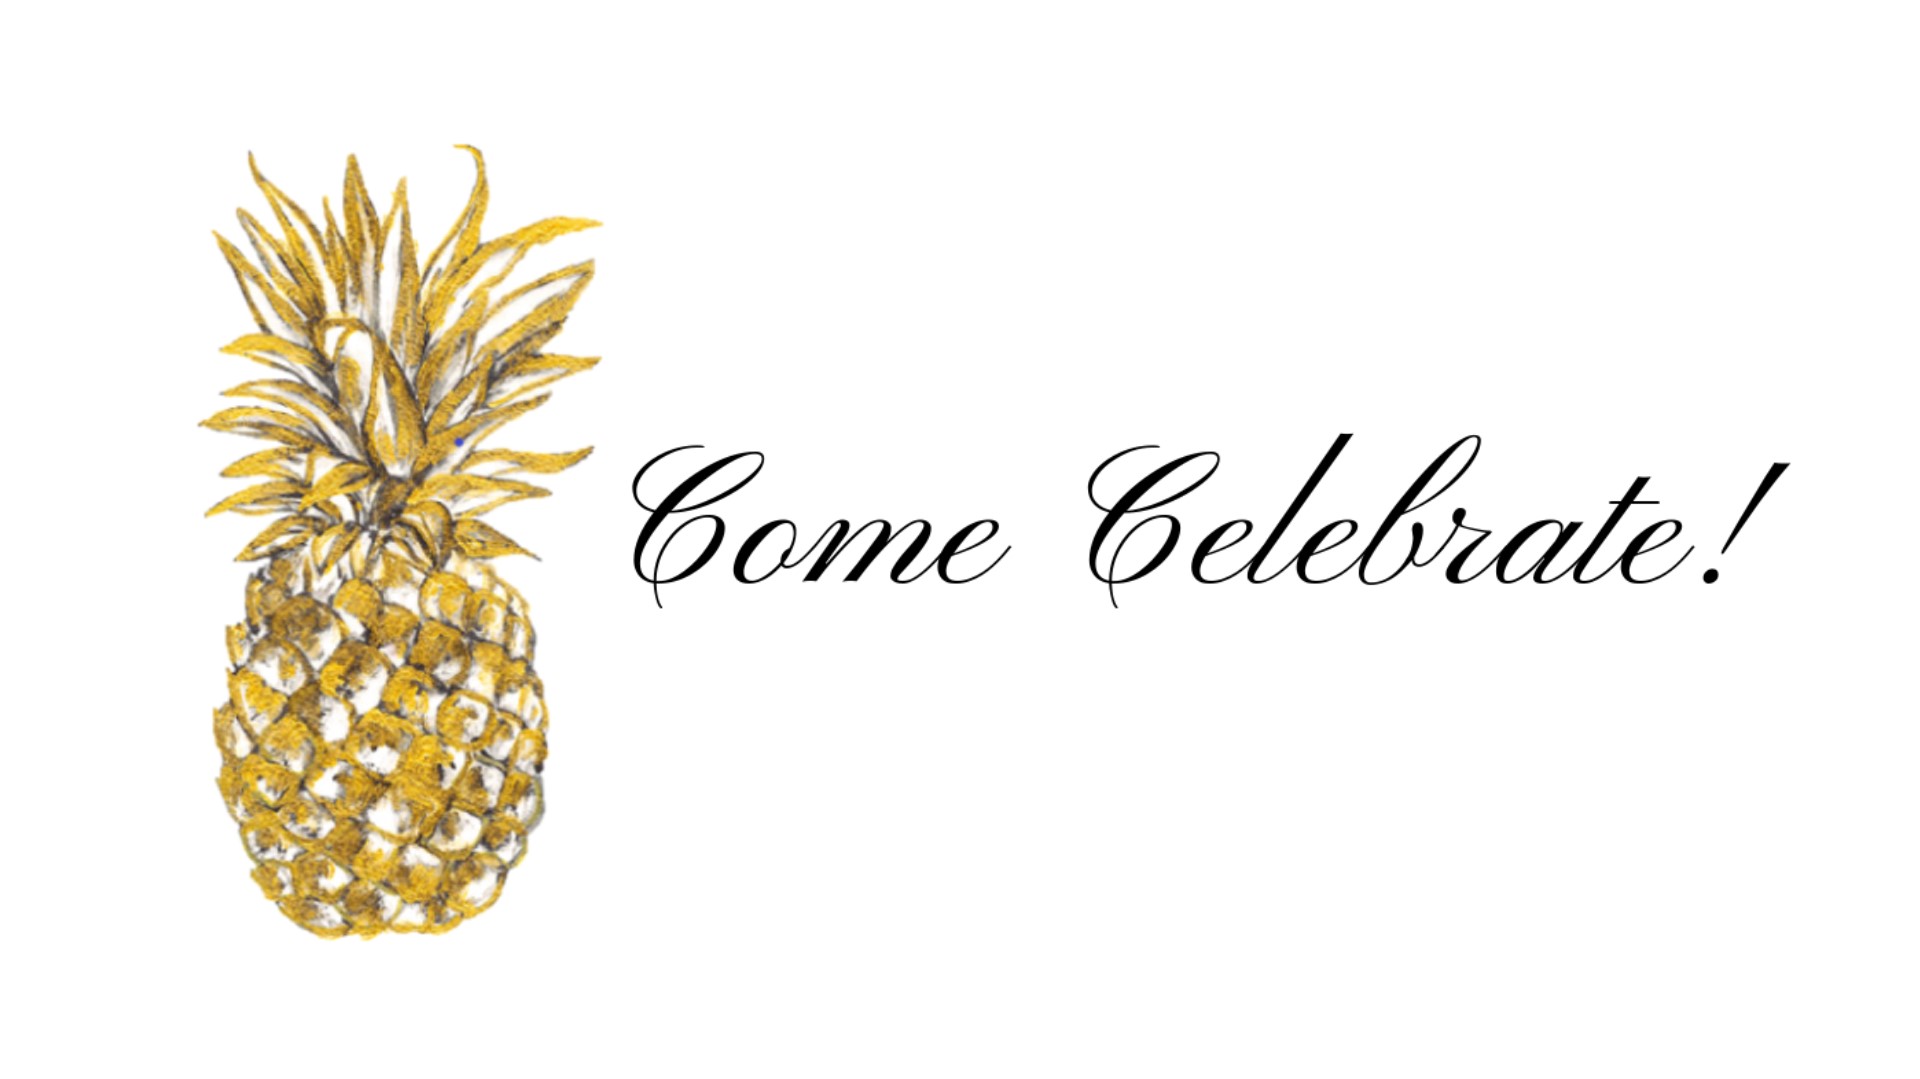 Pineapple and the words Come Celebrate